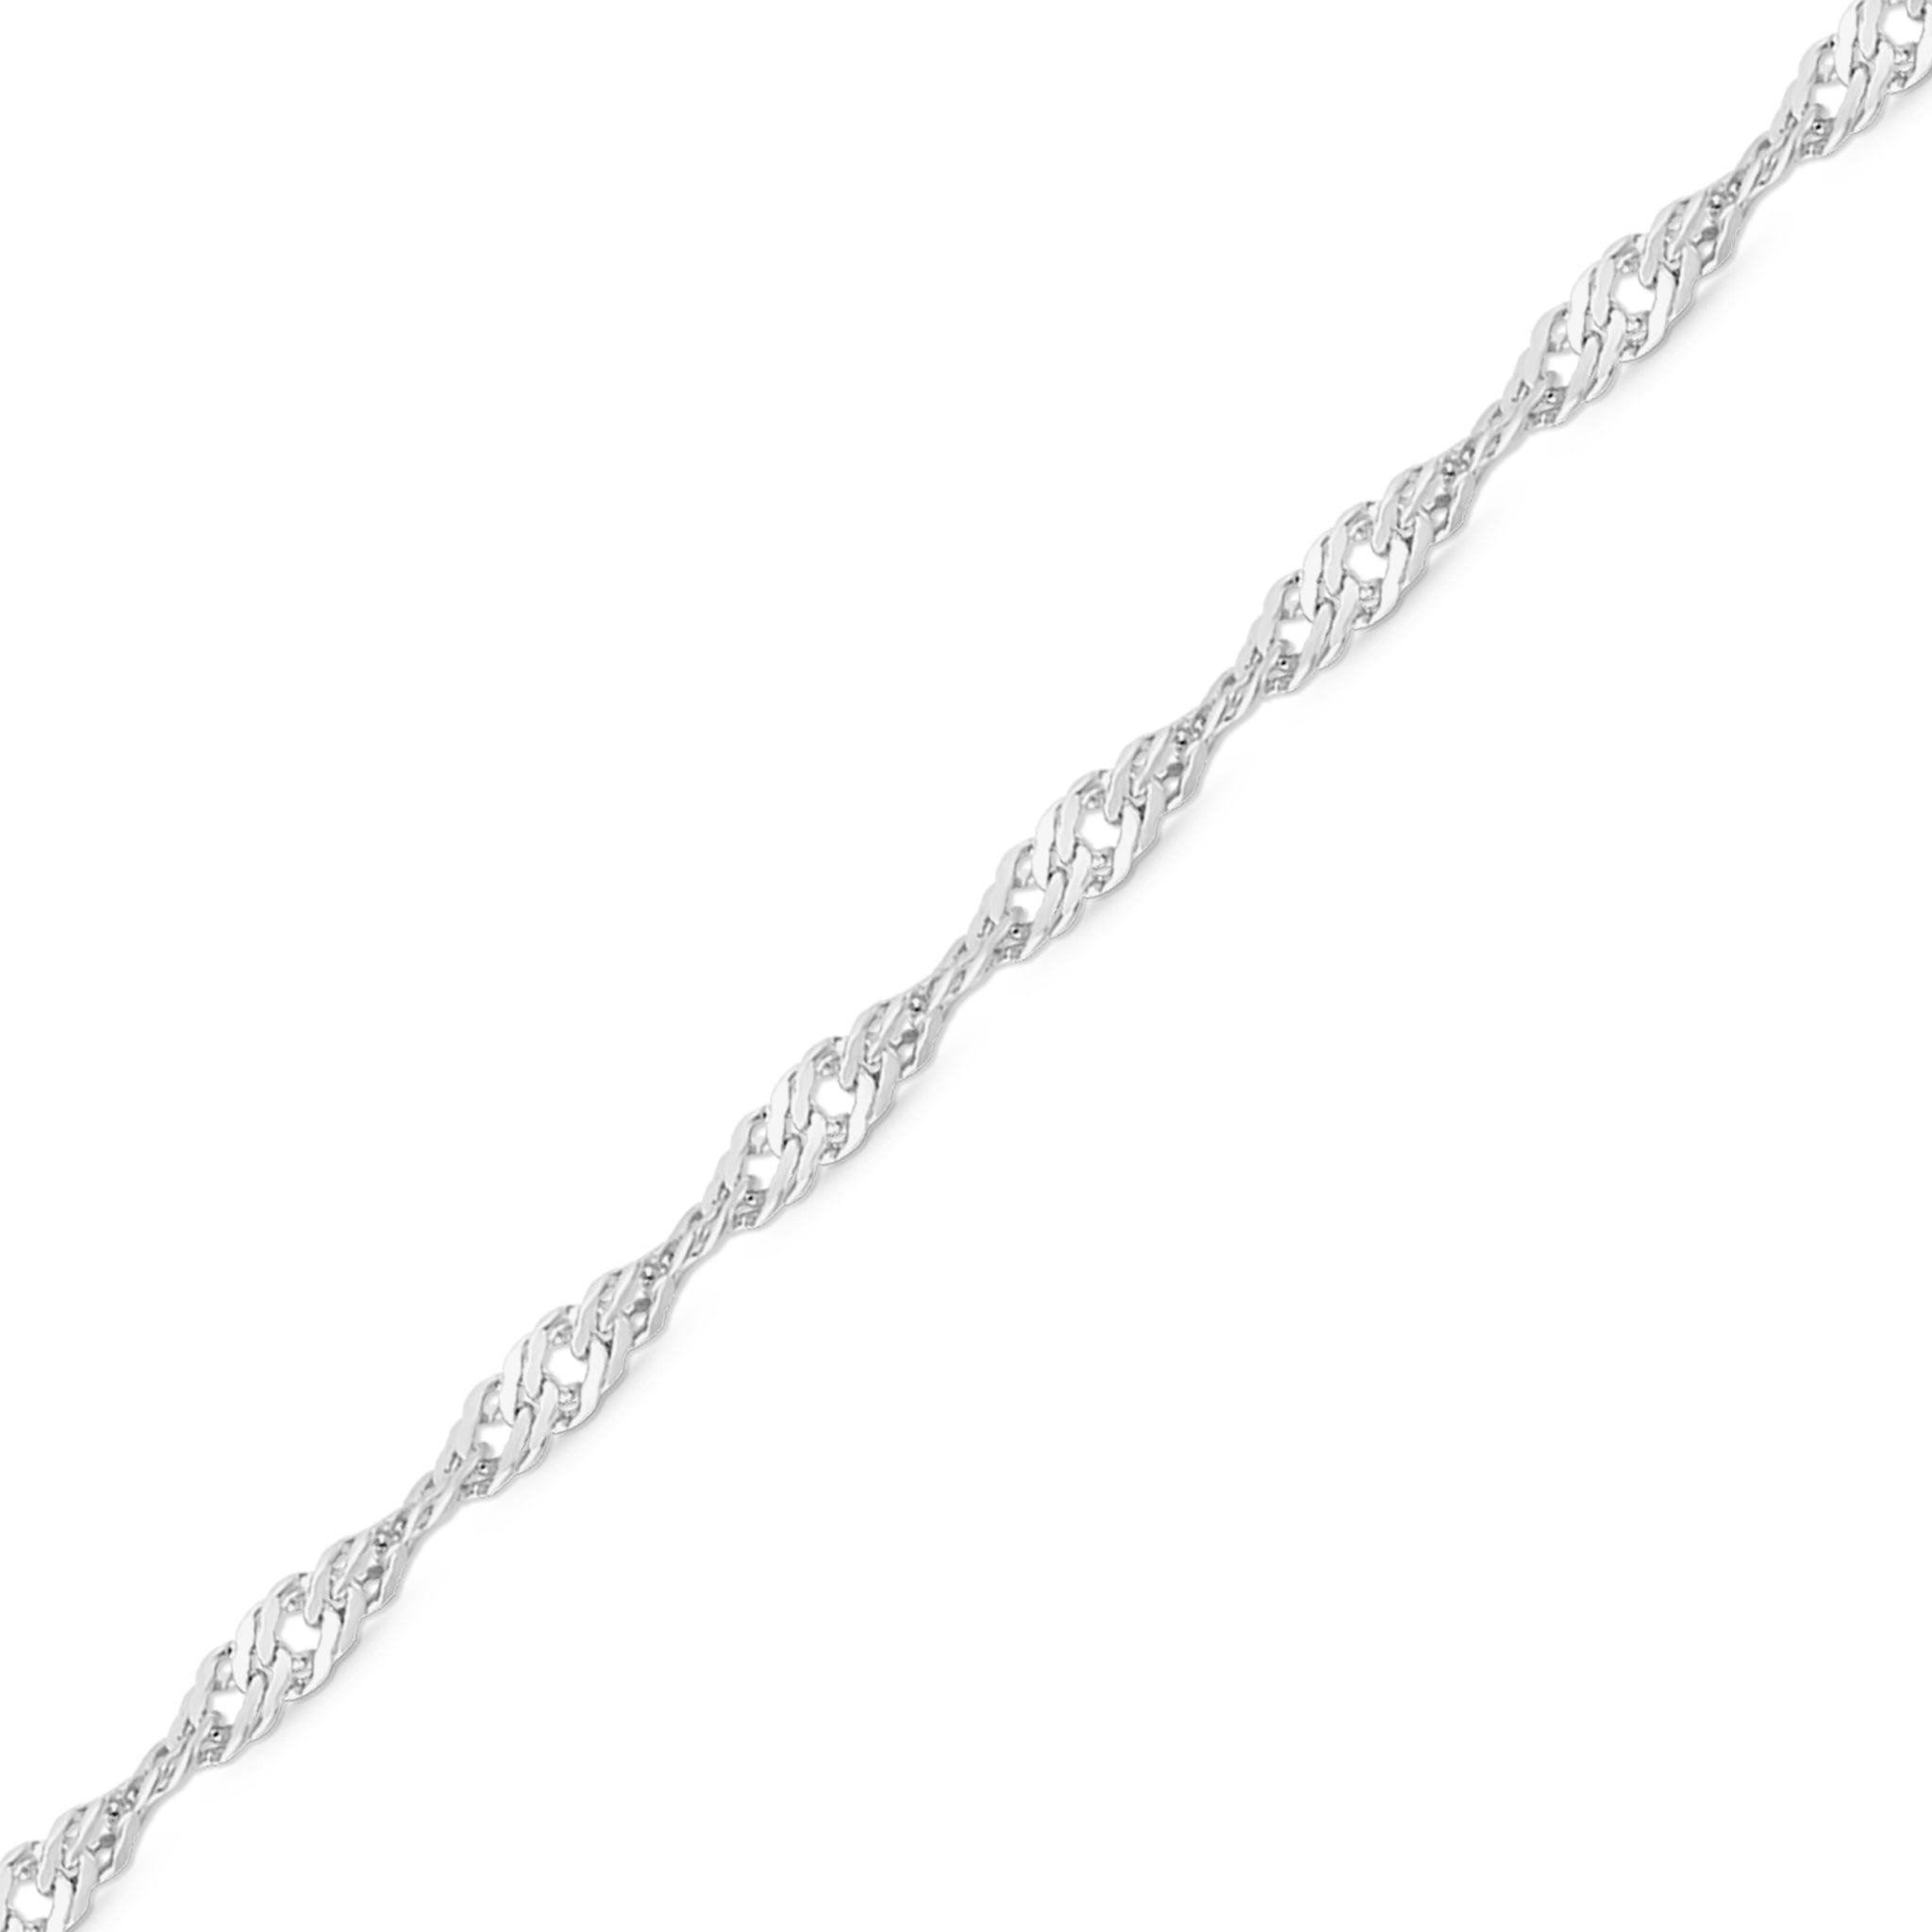 1.2 mm Singapore .925 Sterling Silver Permanent Jewelry Chain - By the Foot / PMJ0007